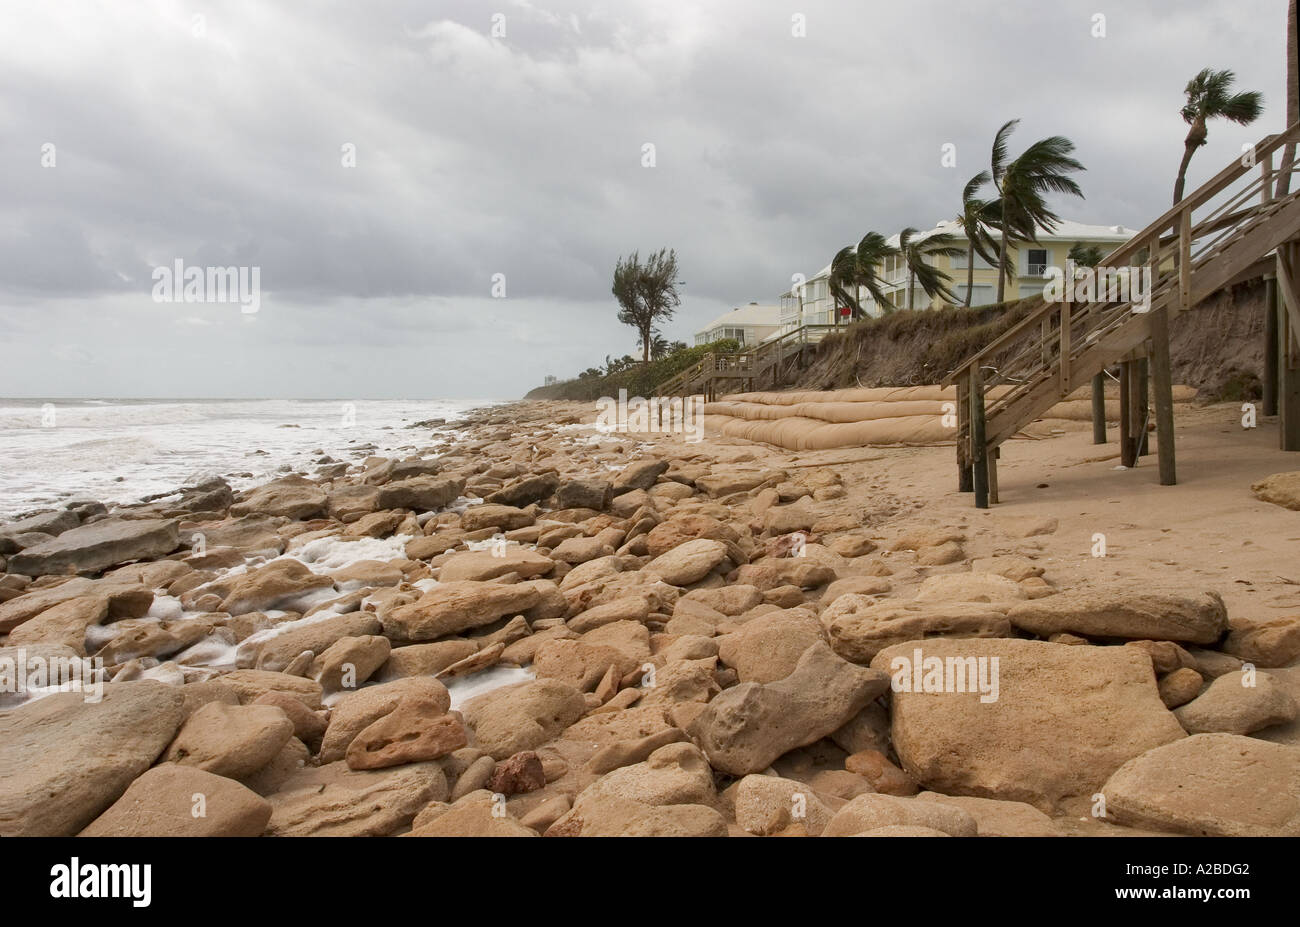 Beach erosion and protection after hurricane Frances Stock Photo